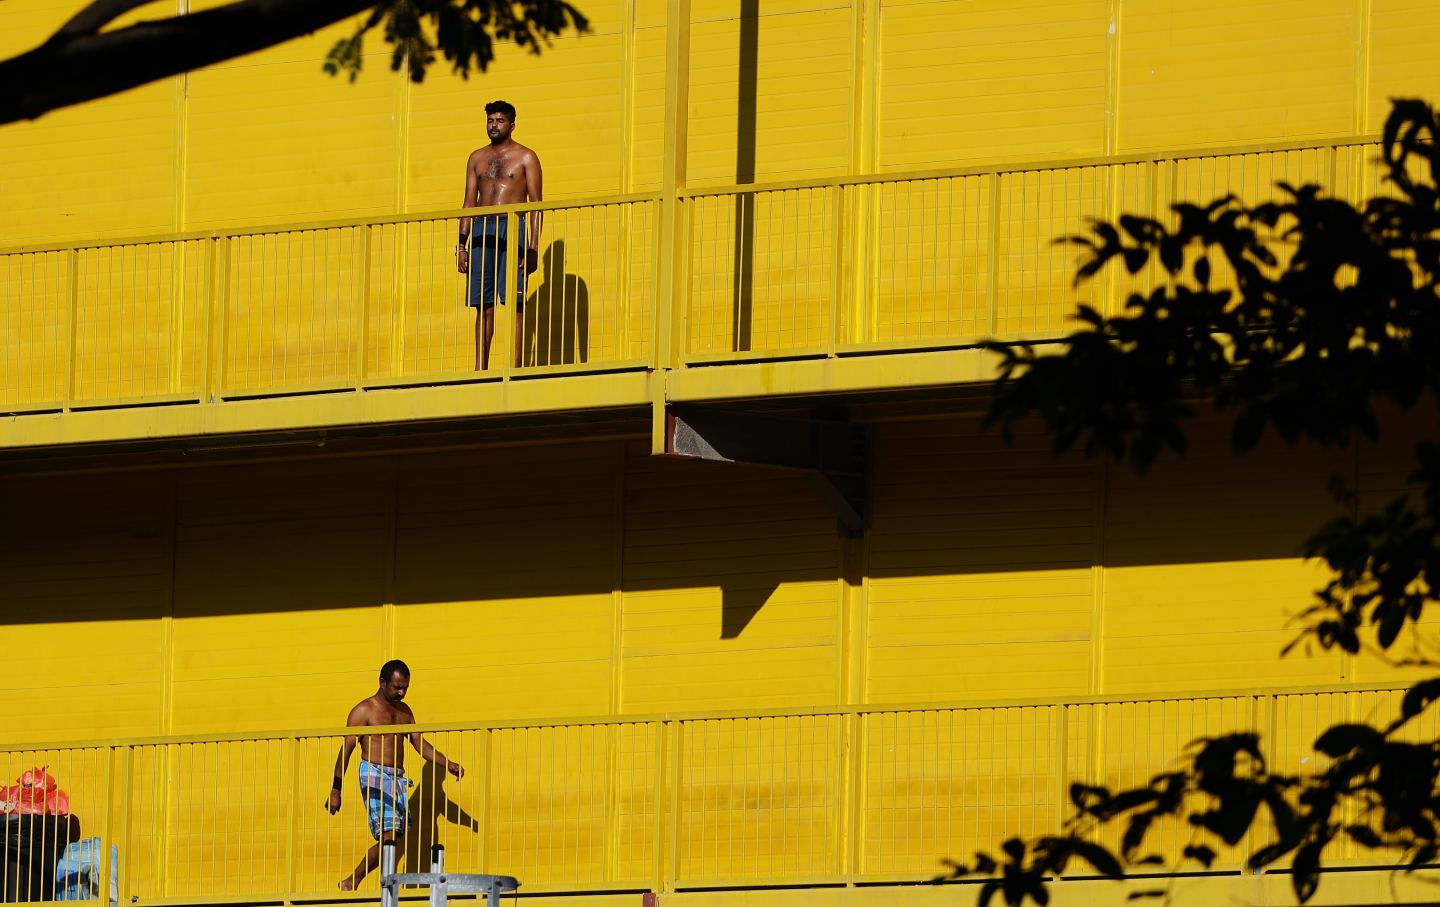 Men exercising without shirts against a yellow building in Singapore.